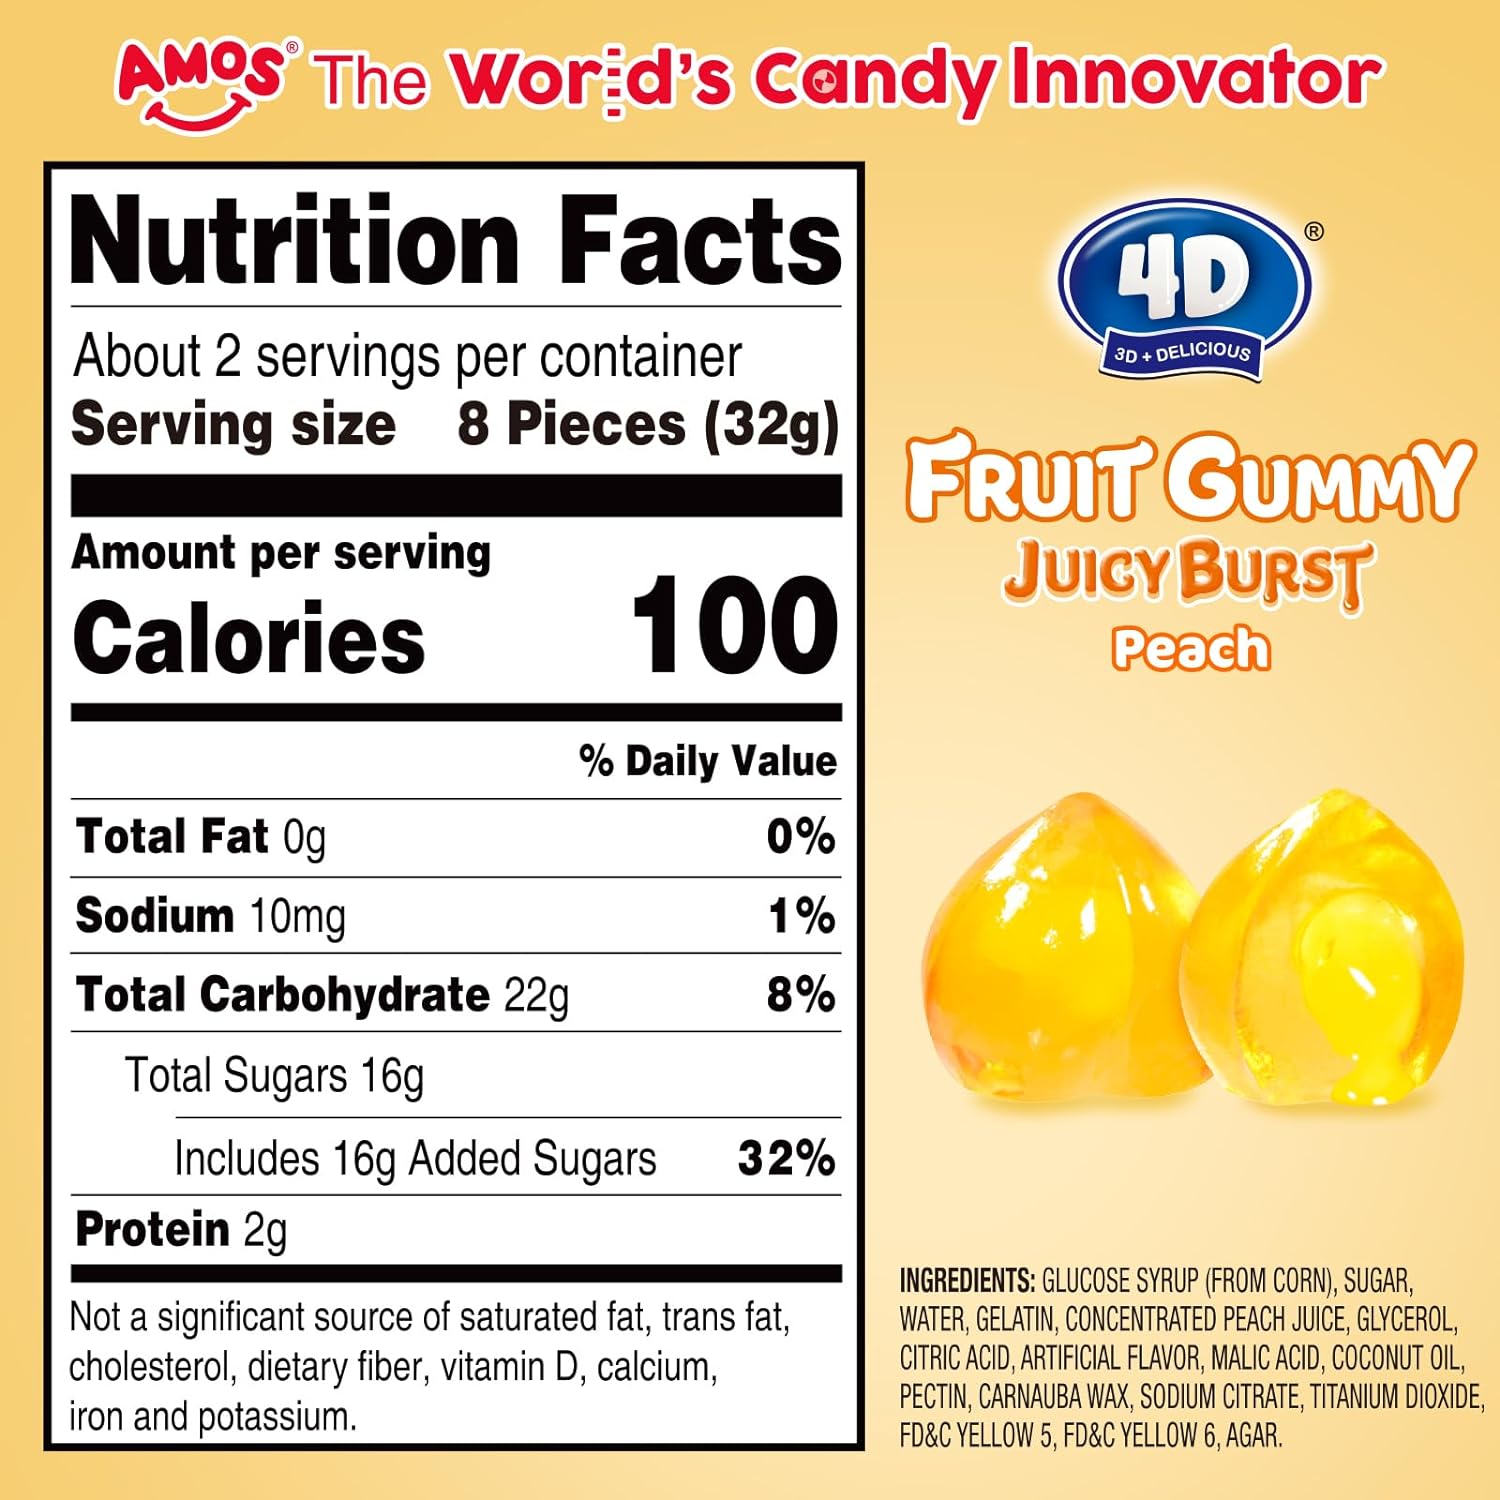 Amos 4D Gummy Candy Juice Burst, Yellow Peach Flavor Gluten Free Snacks, Resealable 2.29Oz Pack, Pack Of 12